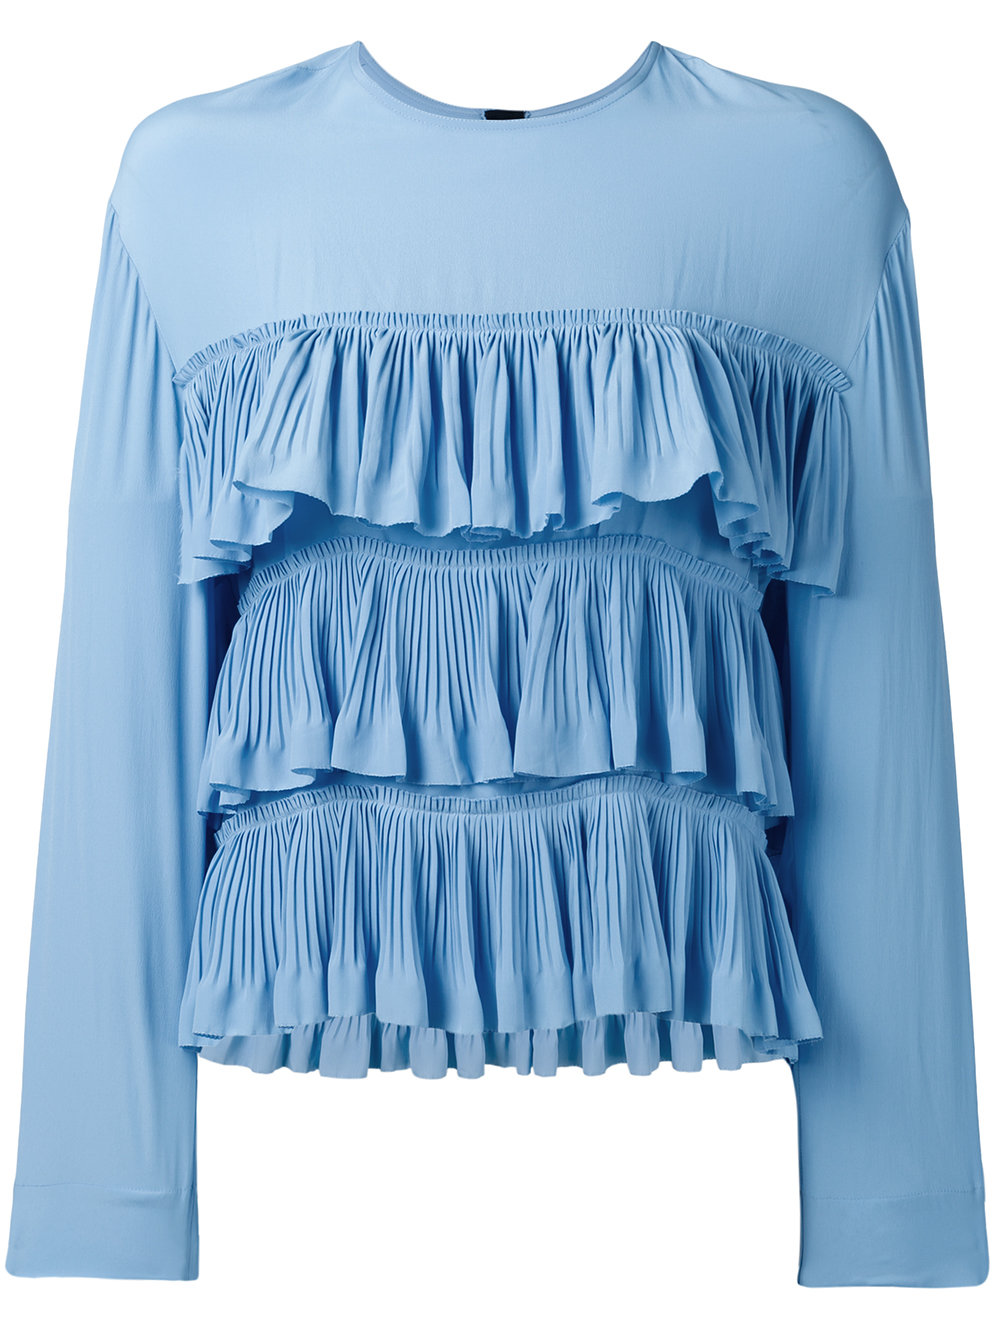 How To Add Ruffles To Your Wardrobe 12